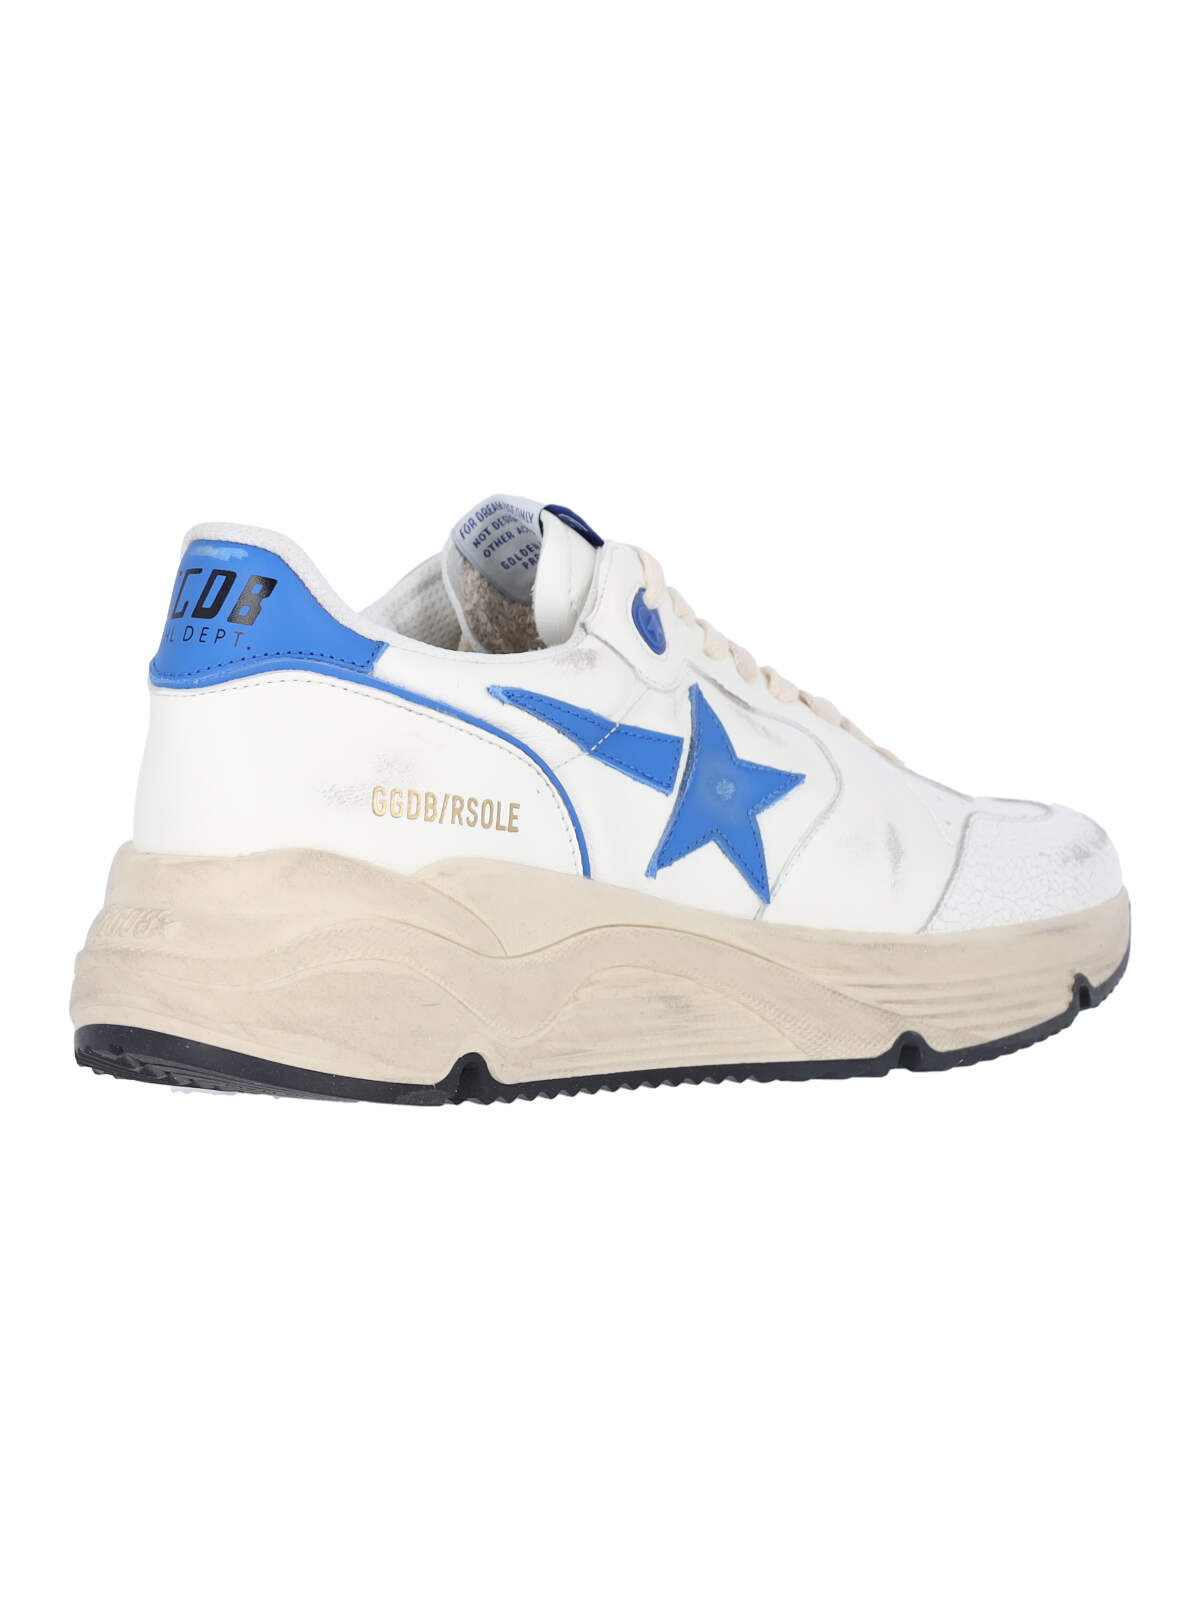 Shop Golden Goose Running Sole Sneakers In White